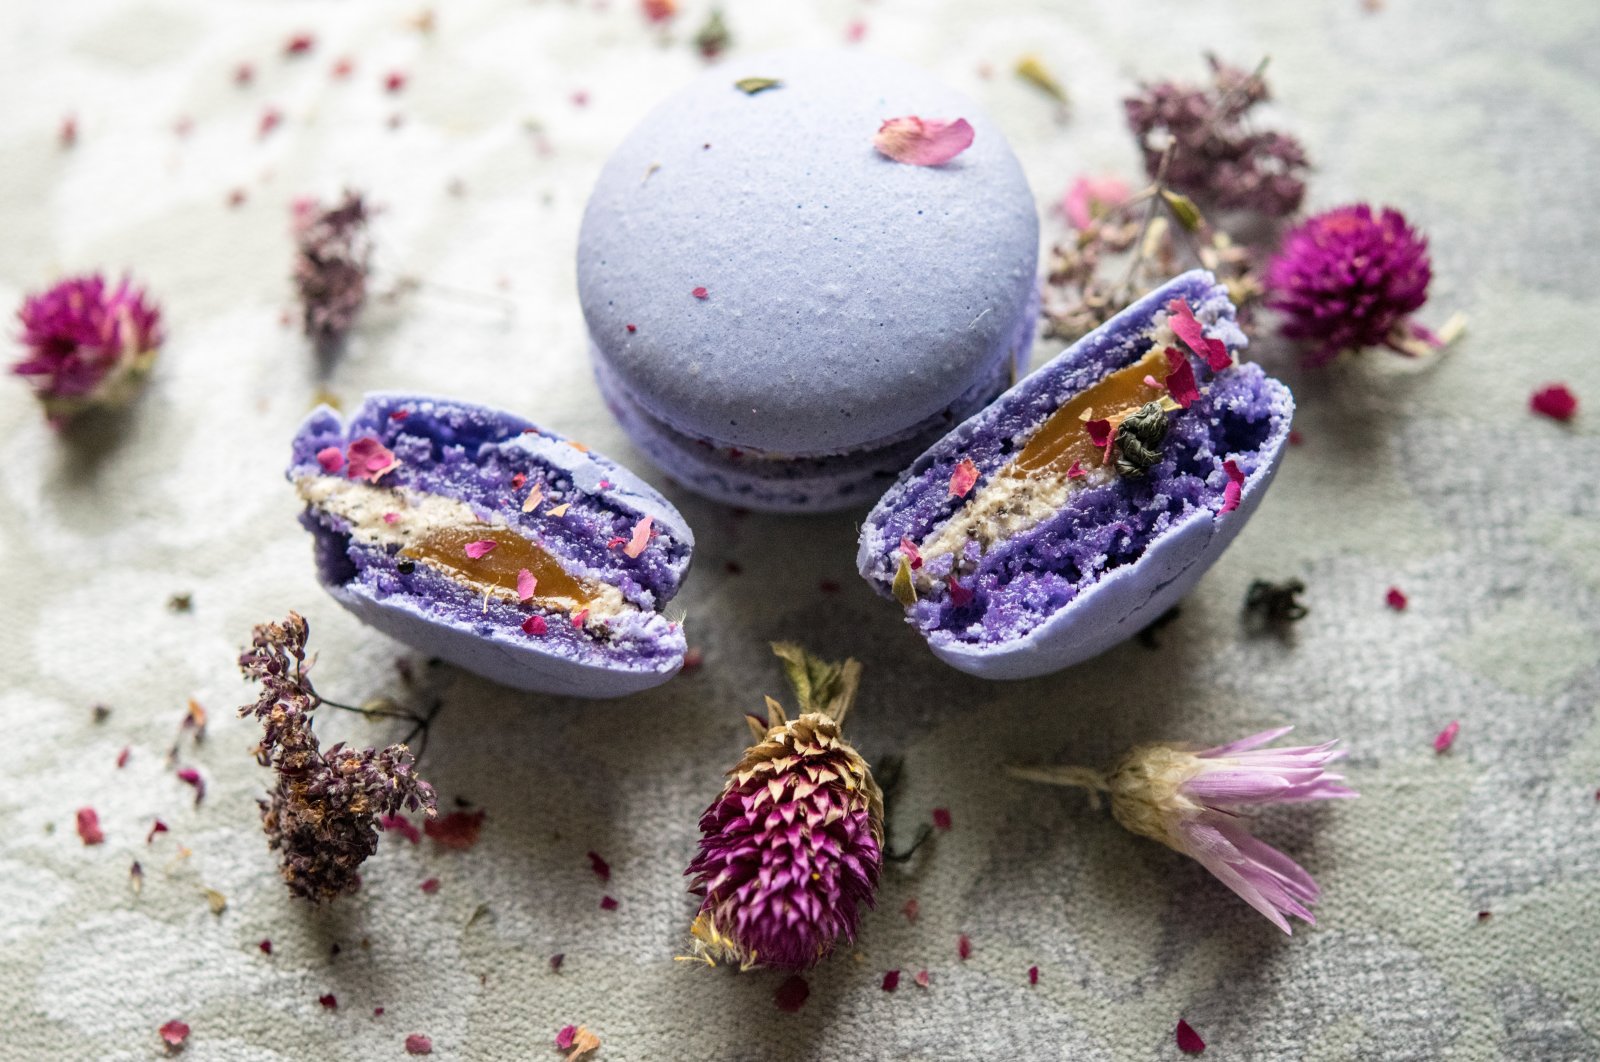 A macaron or French macaroon is a sweet meringue-based confection made with egg white, icing sugar, granulated sugar, almond meal and food coloring. (Shutterstock Photo)